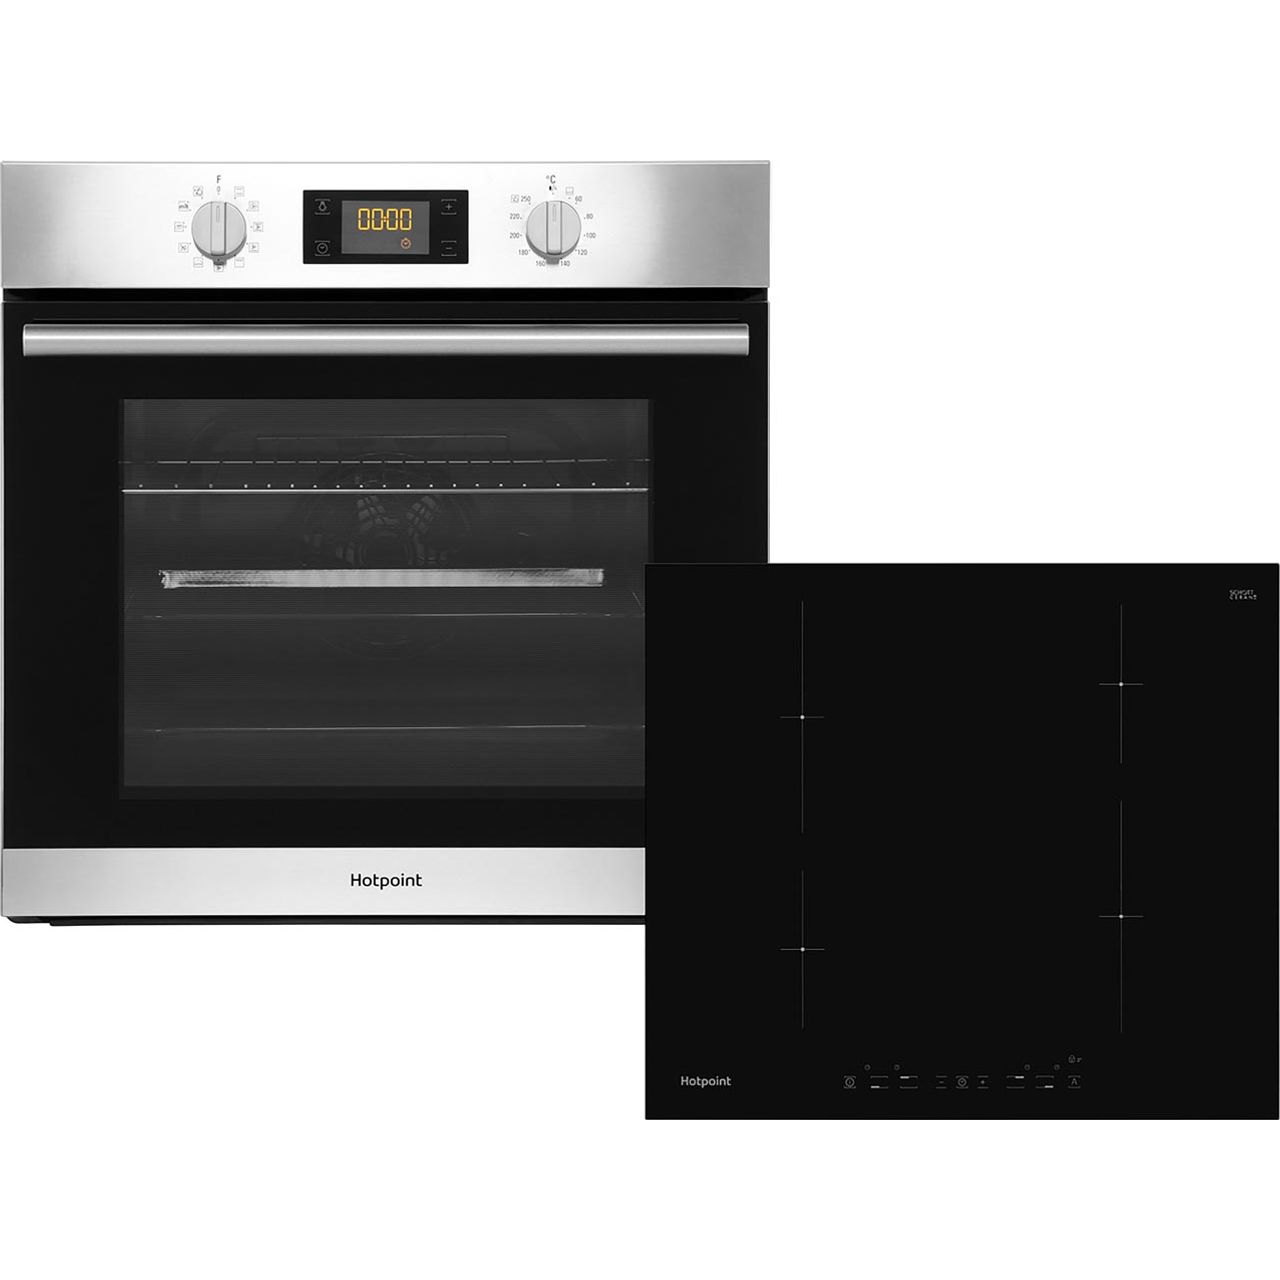 Hotpoint K002909 Built In Electric Single Oven and Induction Hob Pack Review